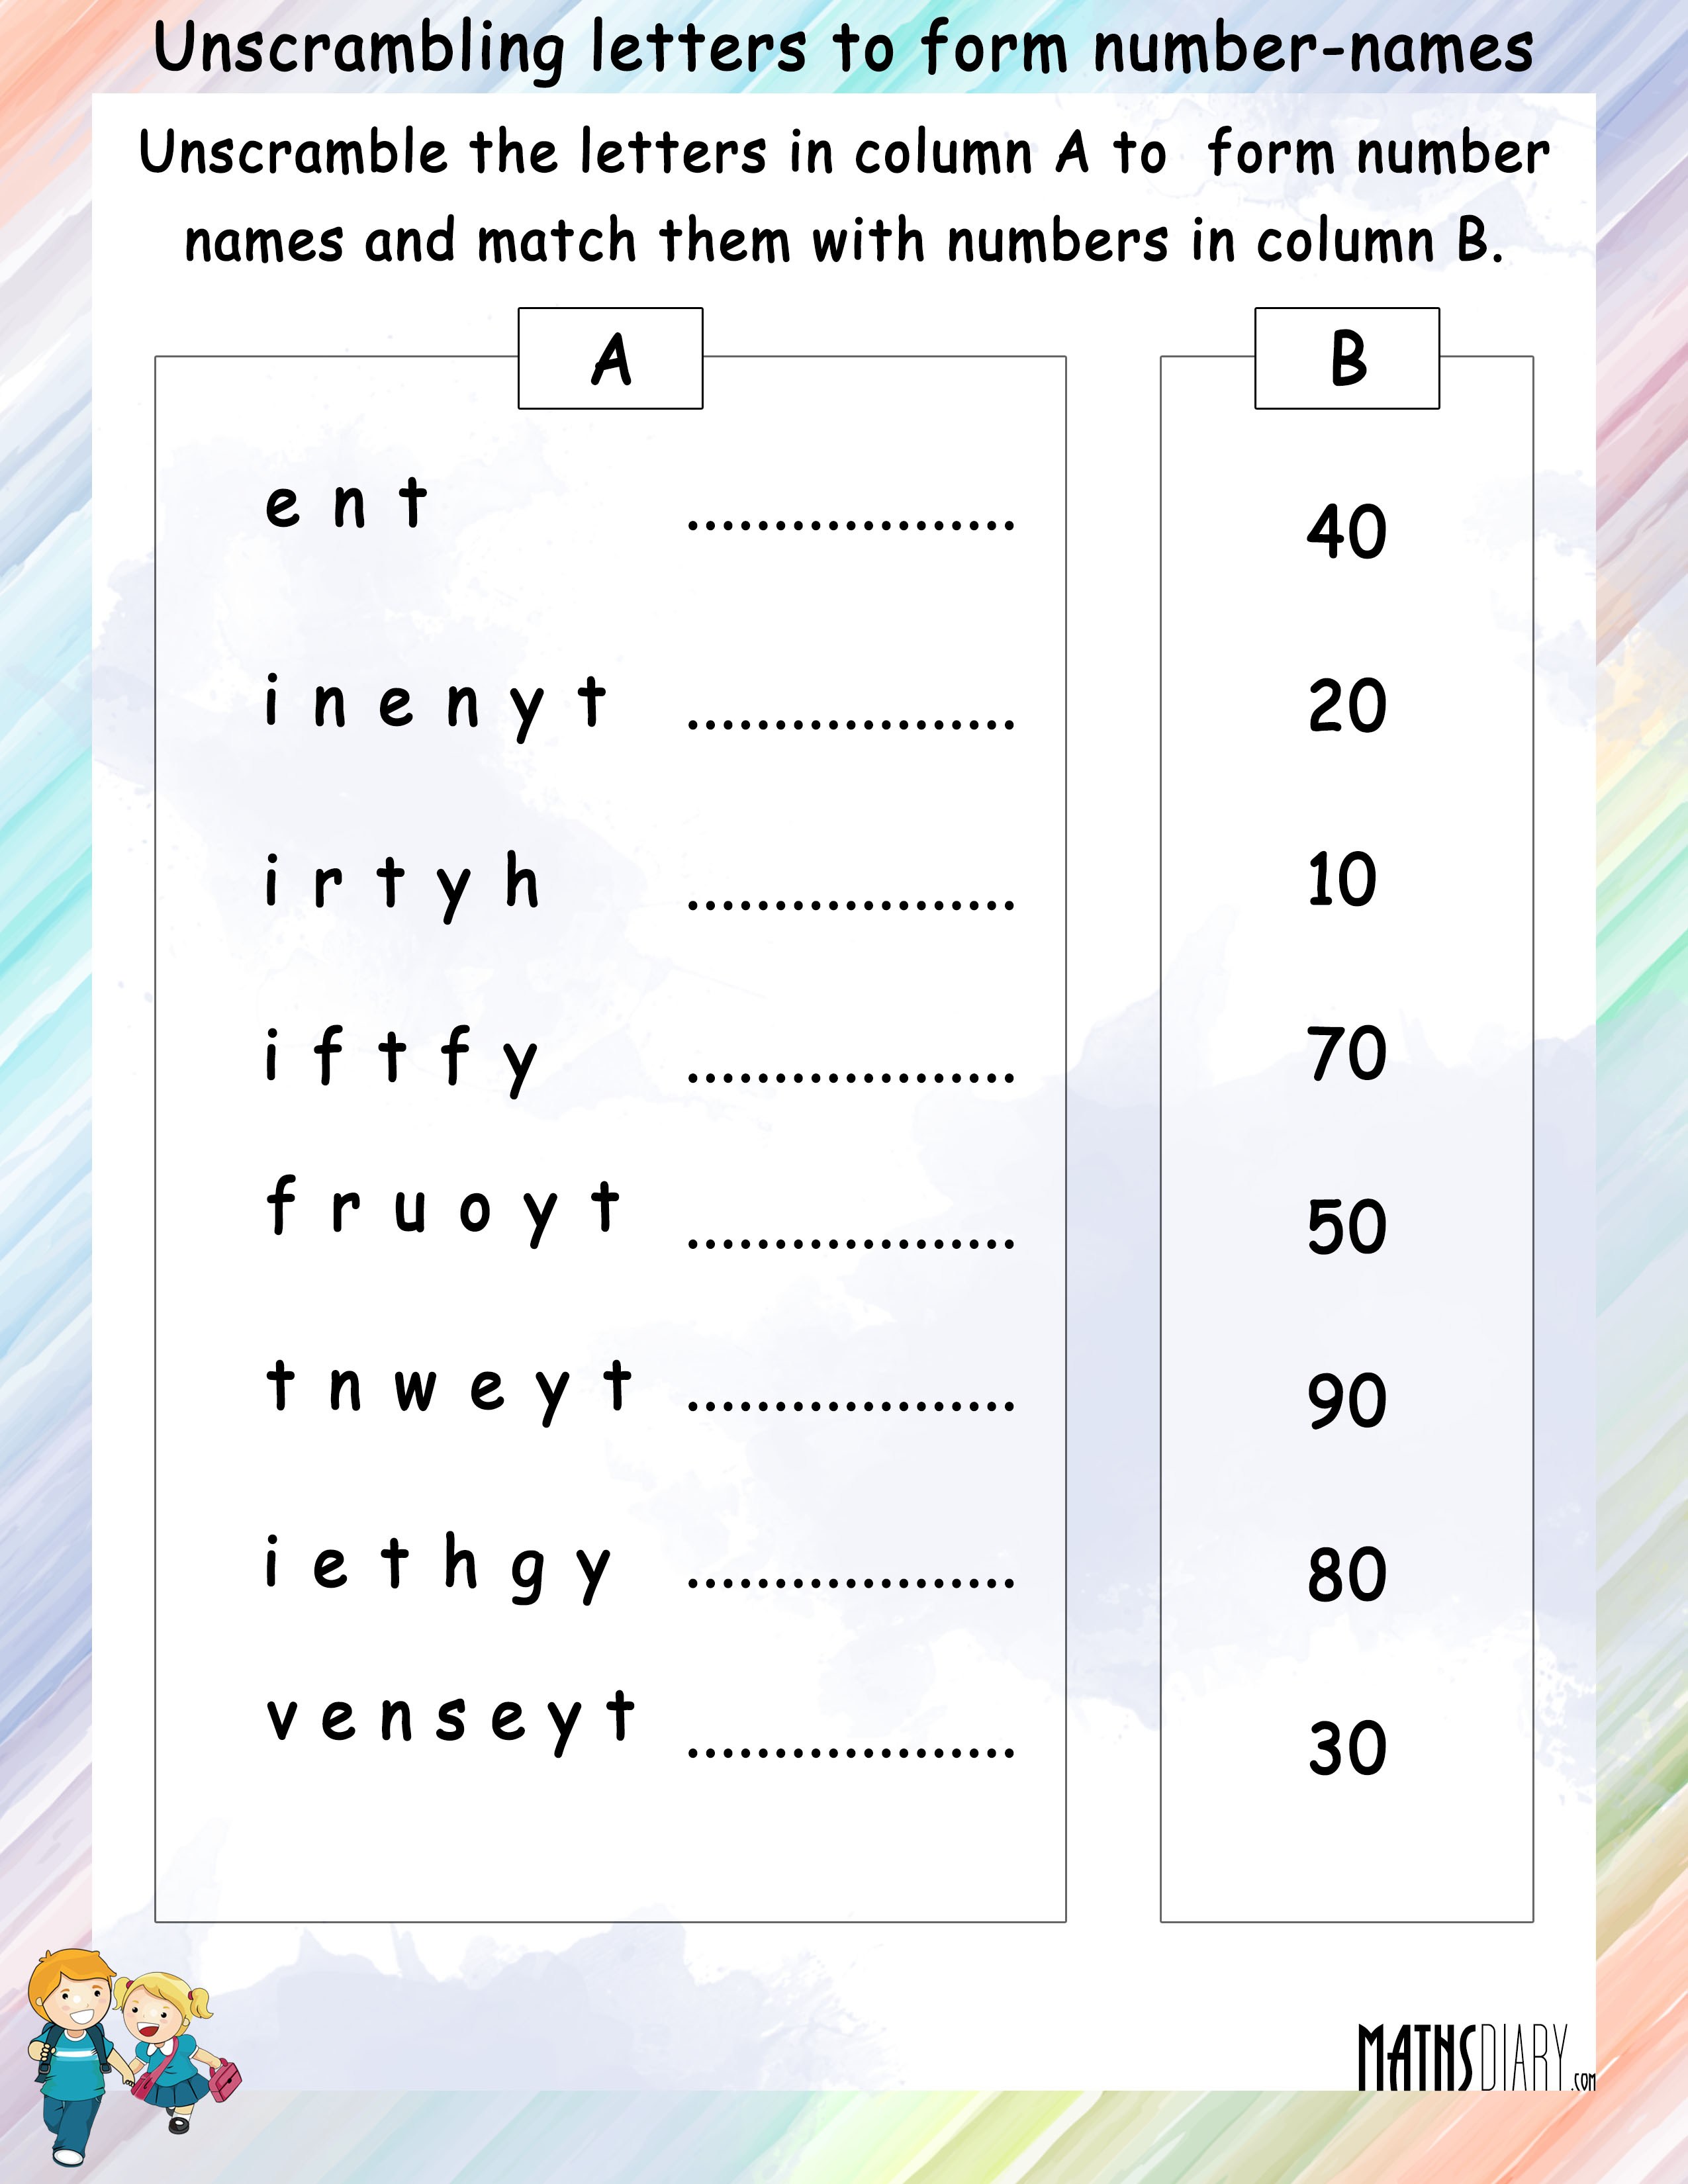 unscramble-letters-to-form-number-names-math-worksheets-mathsdiary